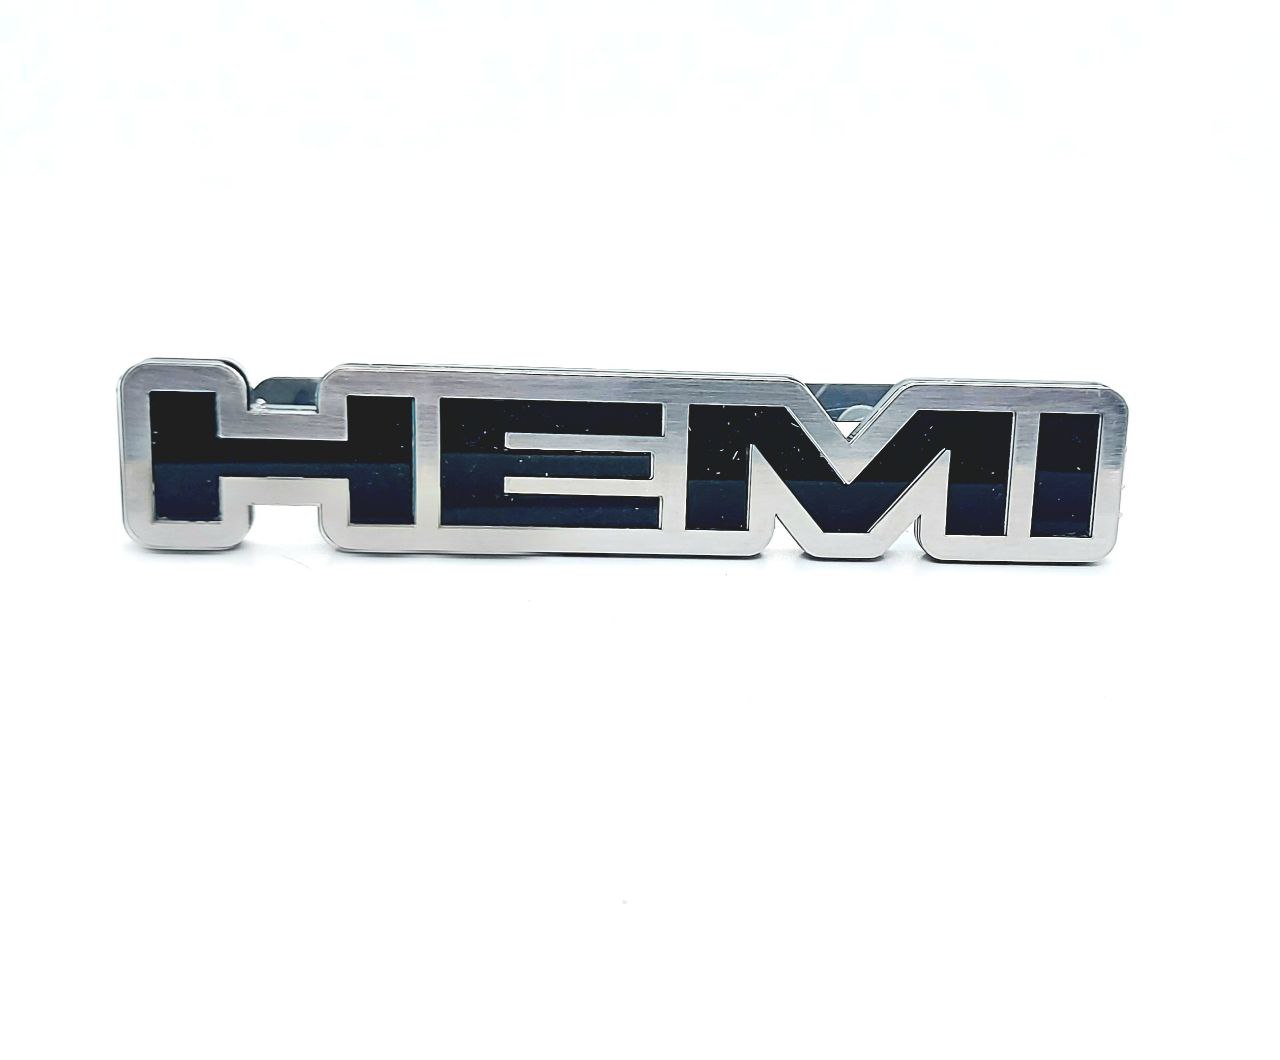 DODGE Stainless Steel Radiator grille emblem with HEMI logo - decoinfabric